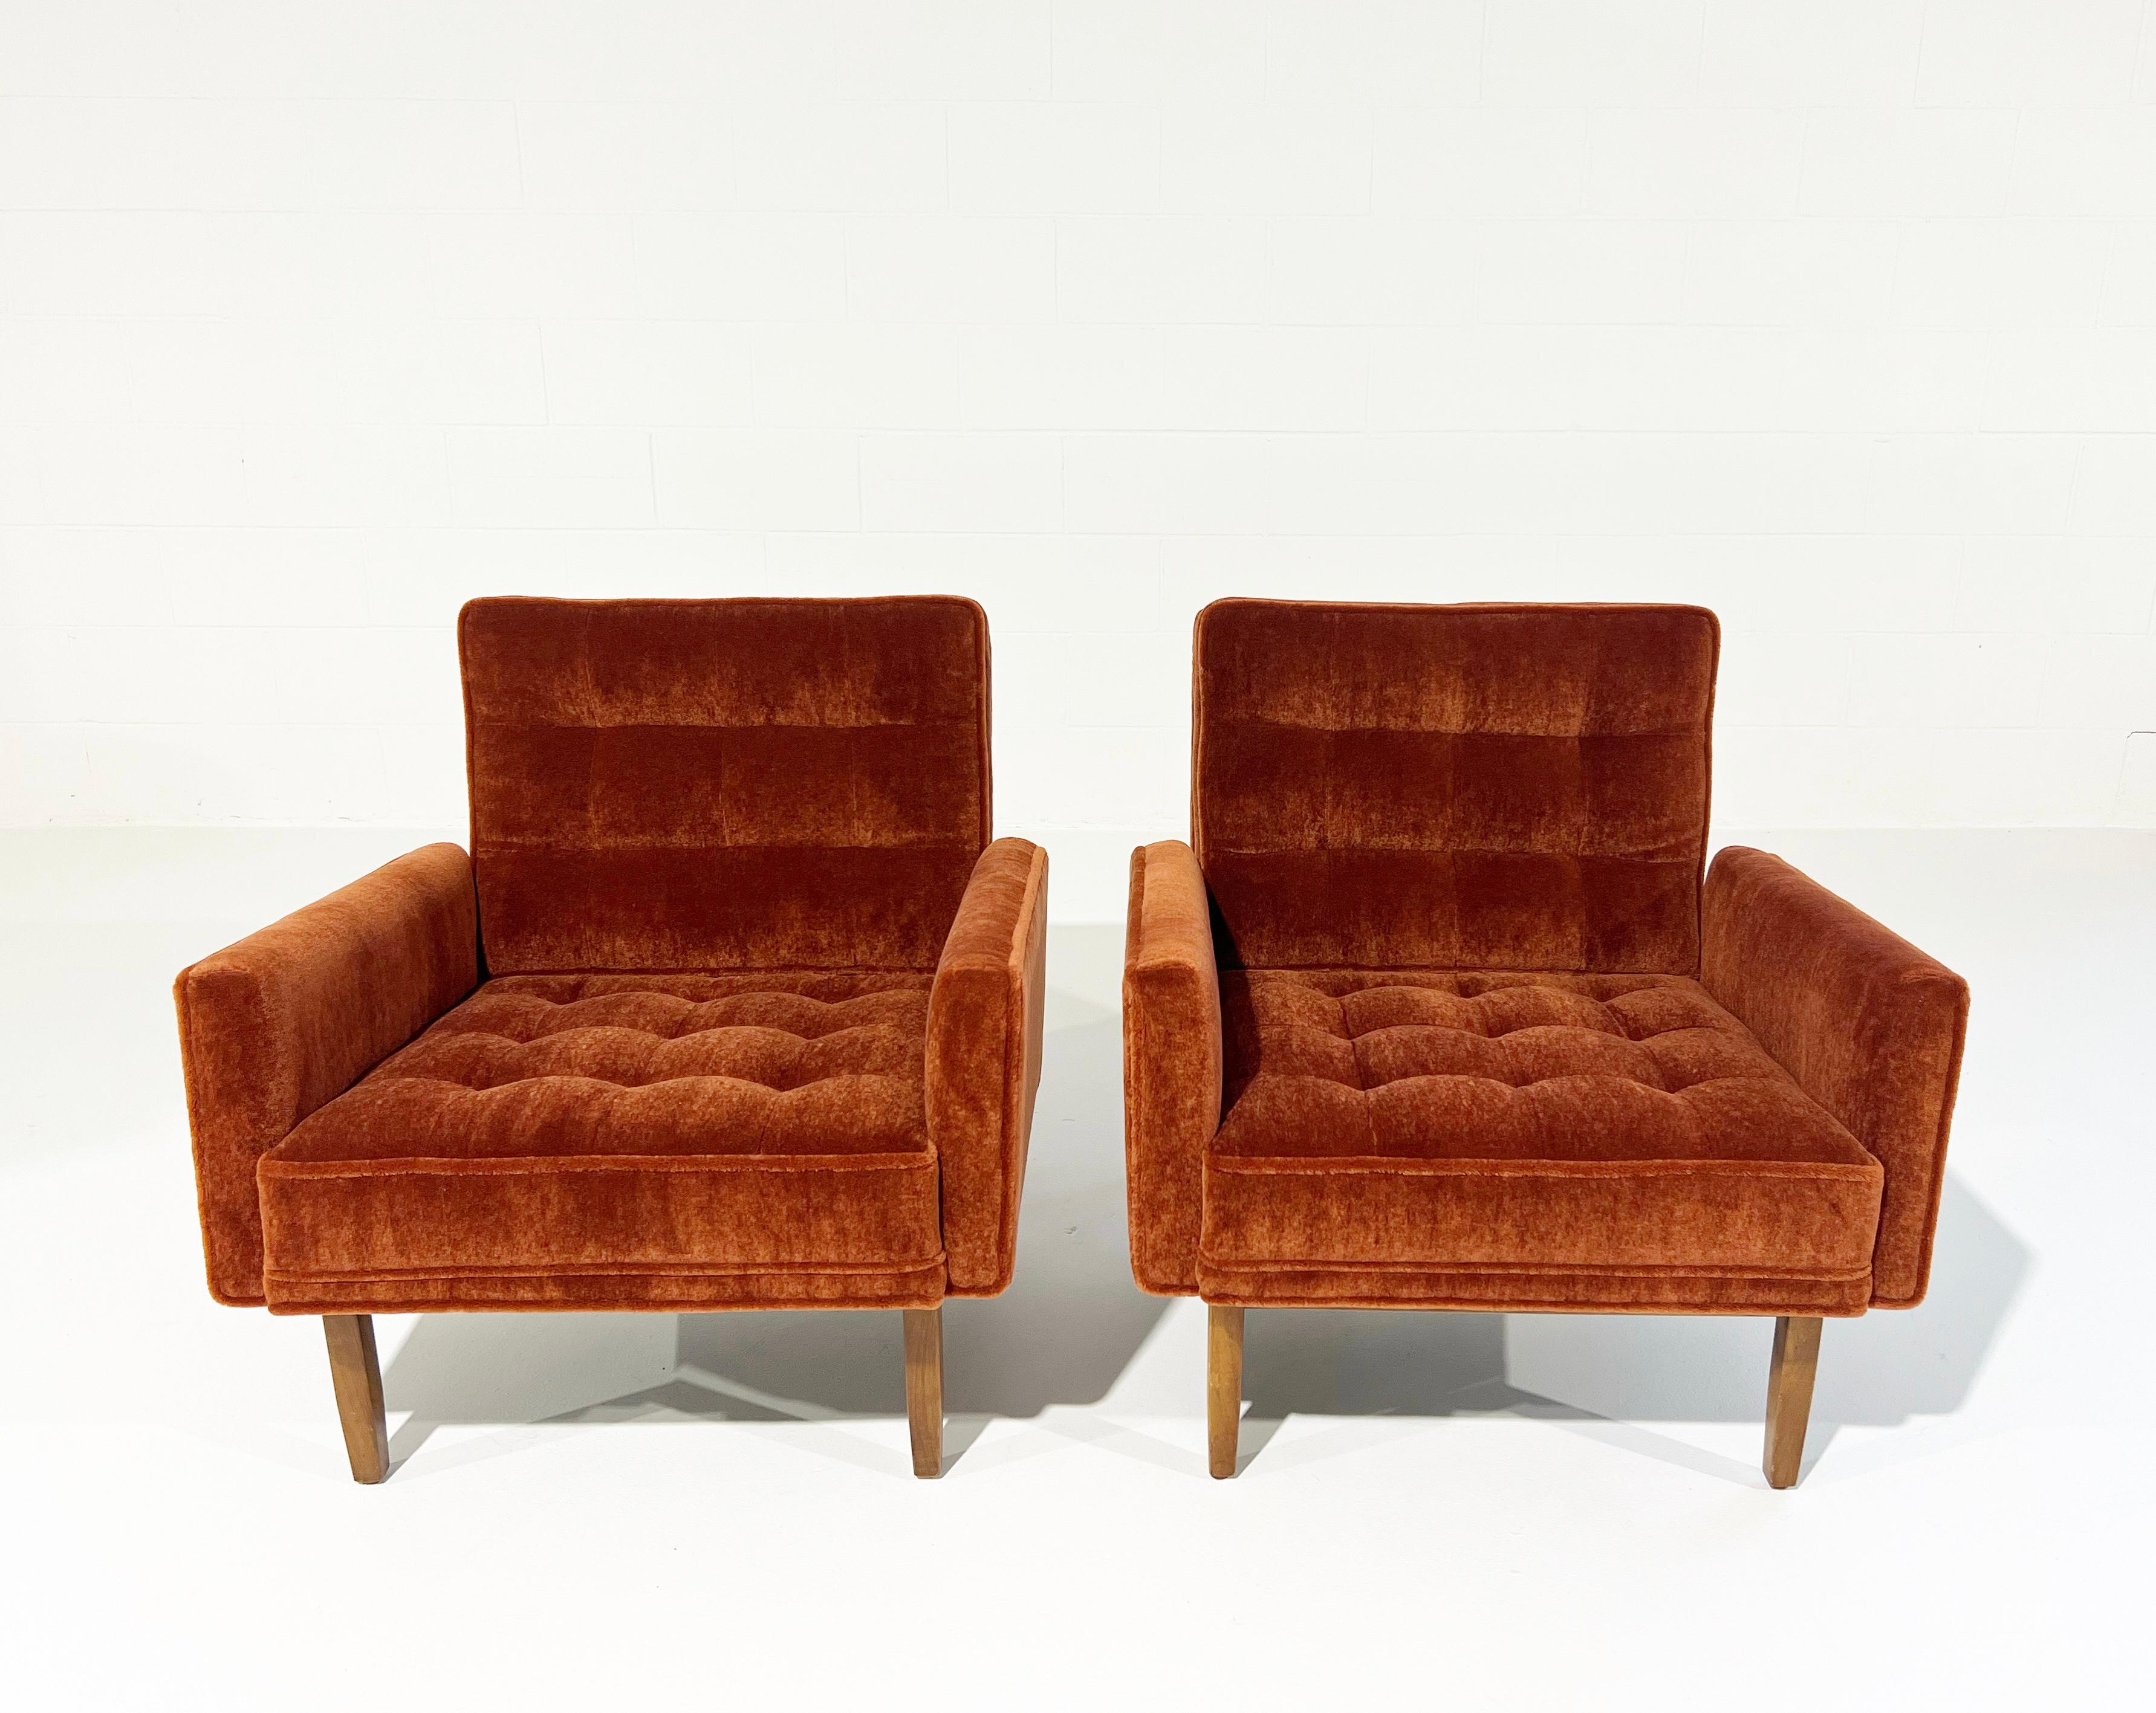 Vintage Restored Florence Knoll Armchairs in Pierre Frey Teddy Mohair For Sale 1